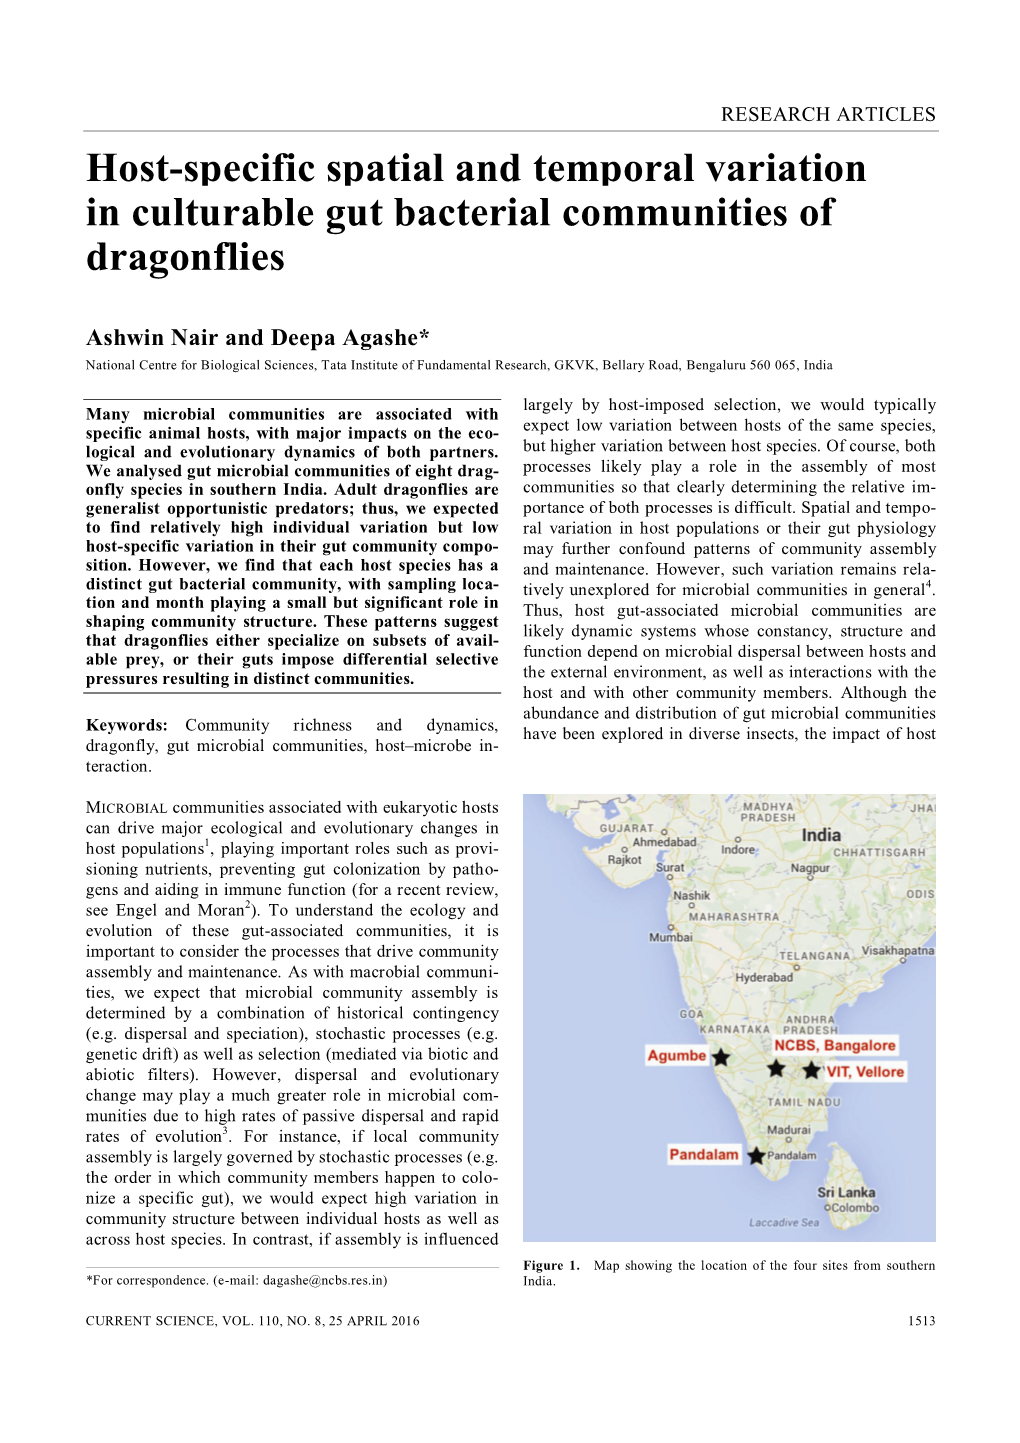 Host-Specific Spatial and Temporal Variation in Culturable Gut Bacterial Communities of Dragonflies